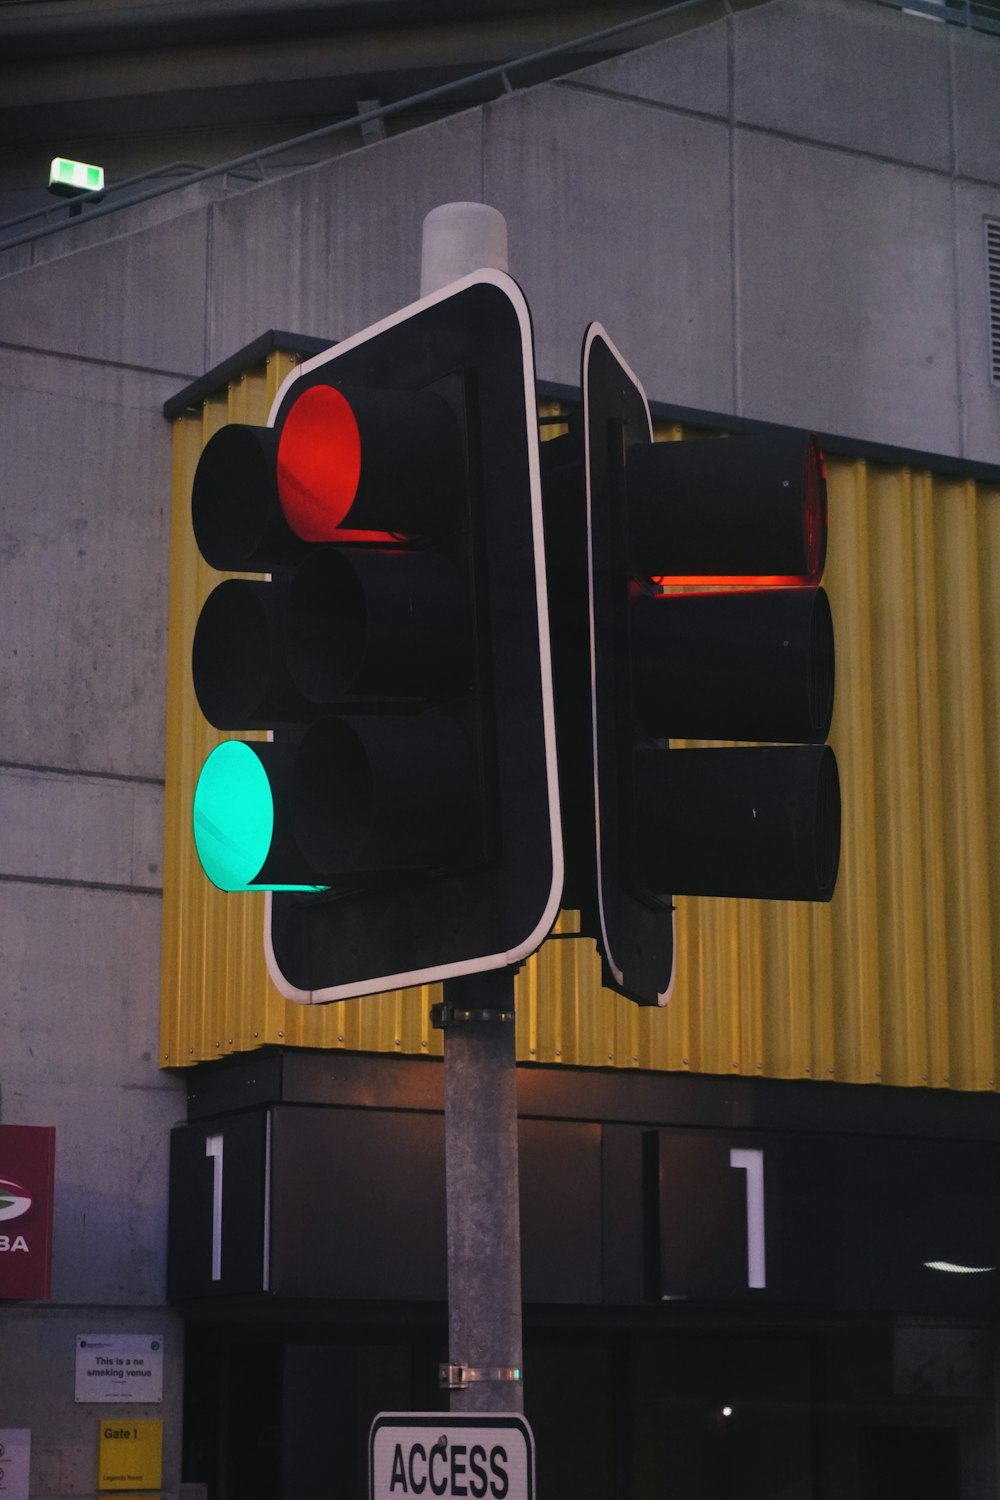 a traffic light has changed to green